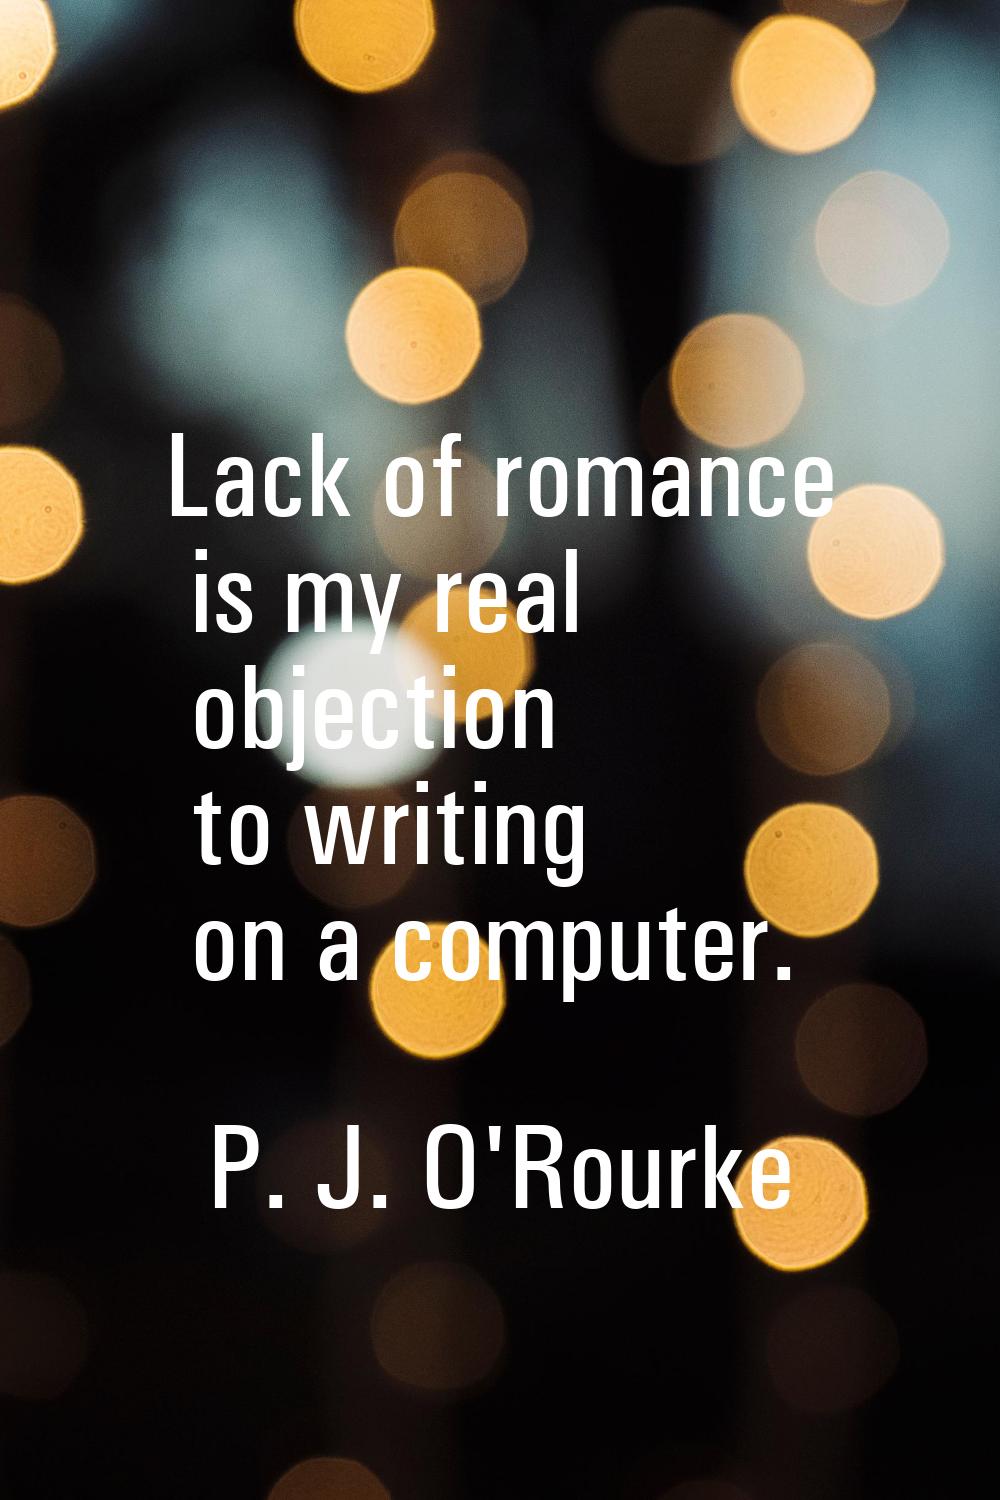 Lack of romance is my real objection to writing on a computer.